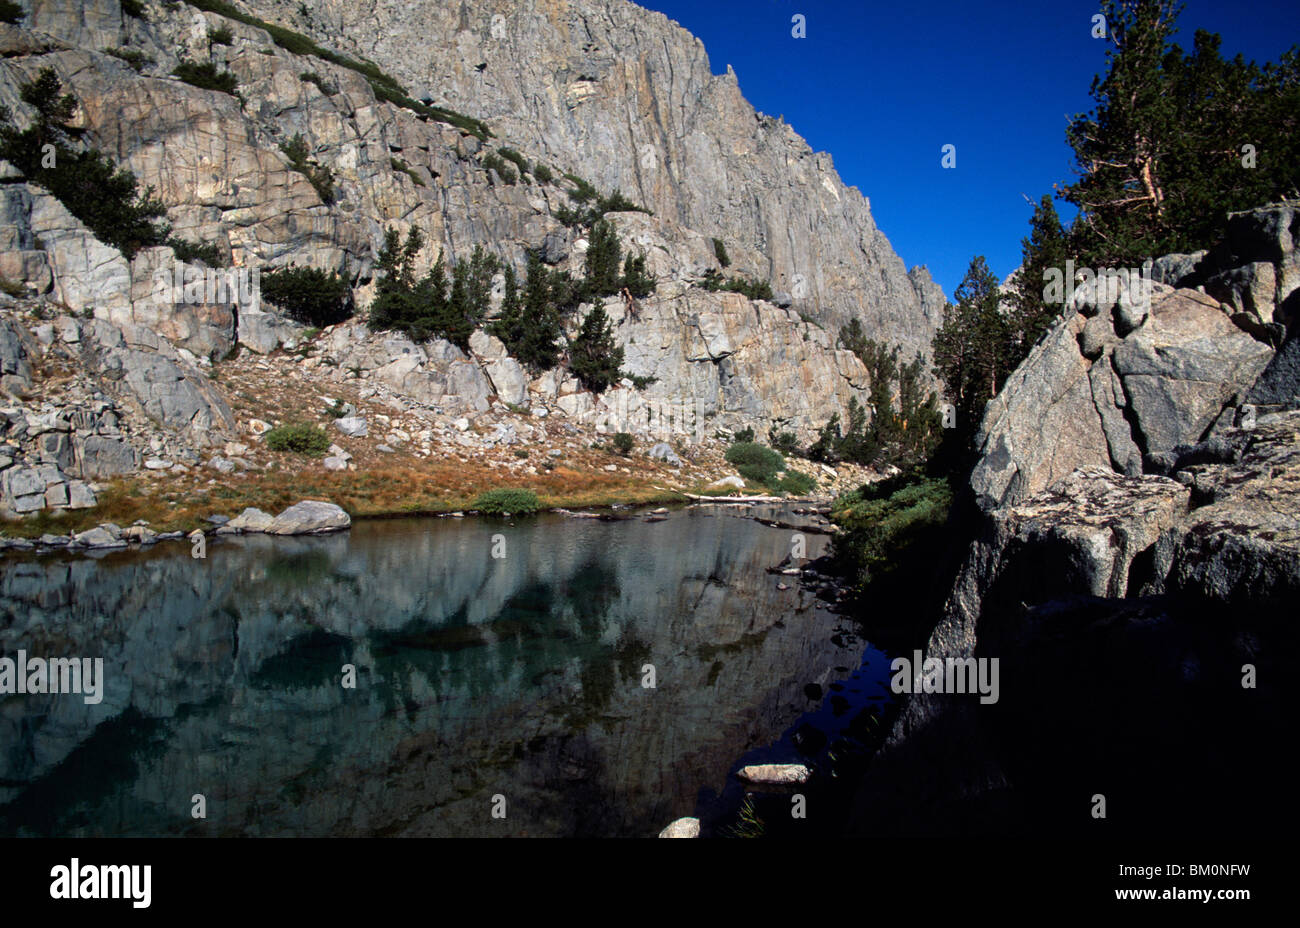 Reflection of cliff in a lake, Finger Lakes, John Muir Wilderness, California, USA Stock Photo